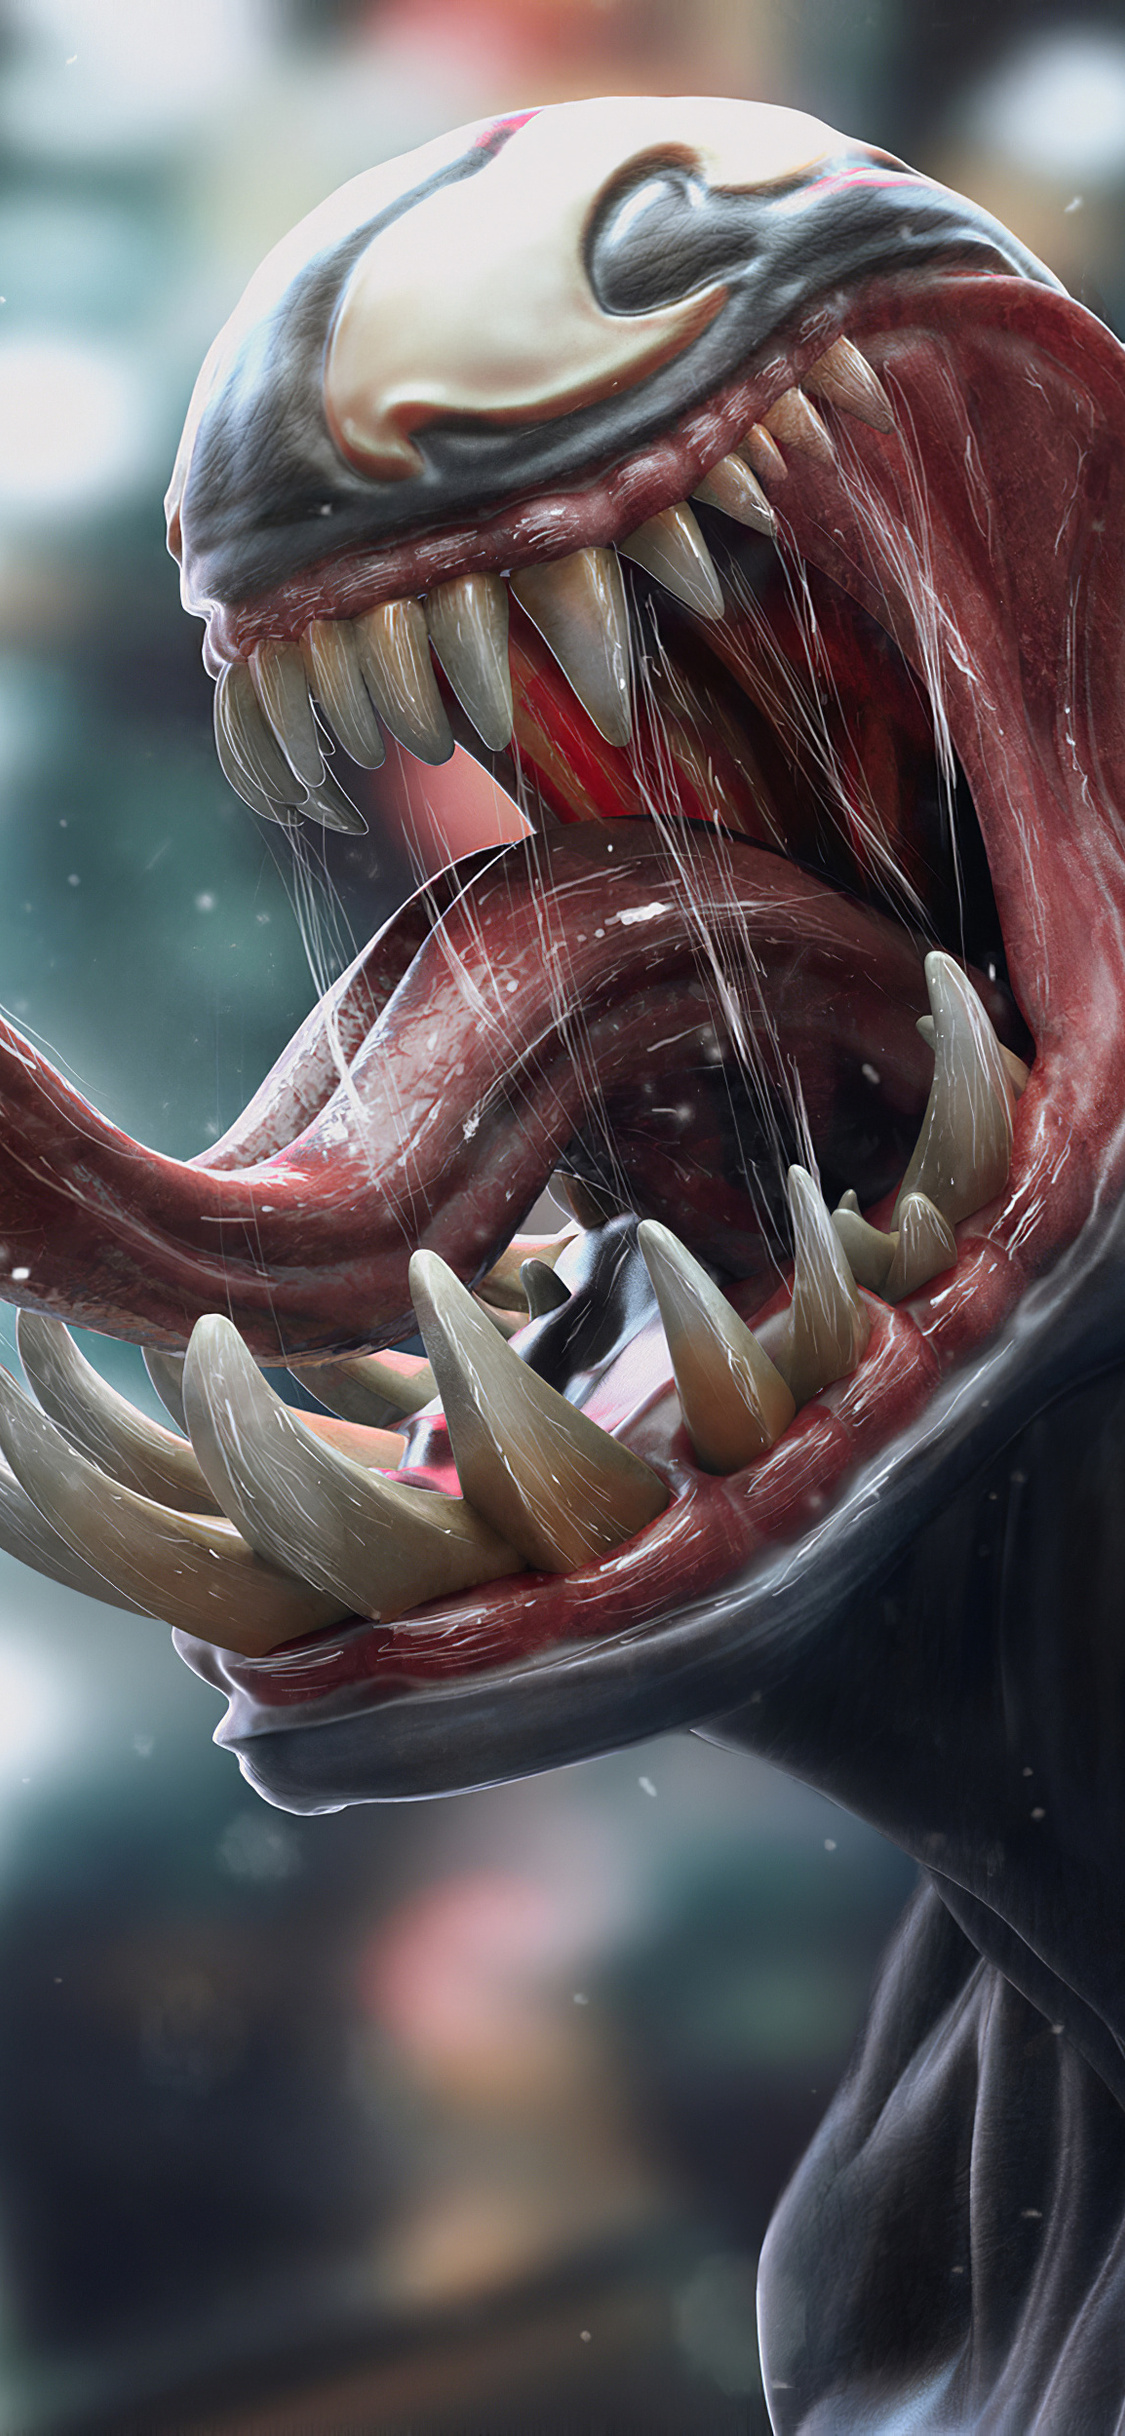 Venom 3D Art Tongue Art 4k iPhone XS, iPhone iPhone X HD 4k Wallpaper, Image, Background, Photo and Picture